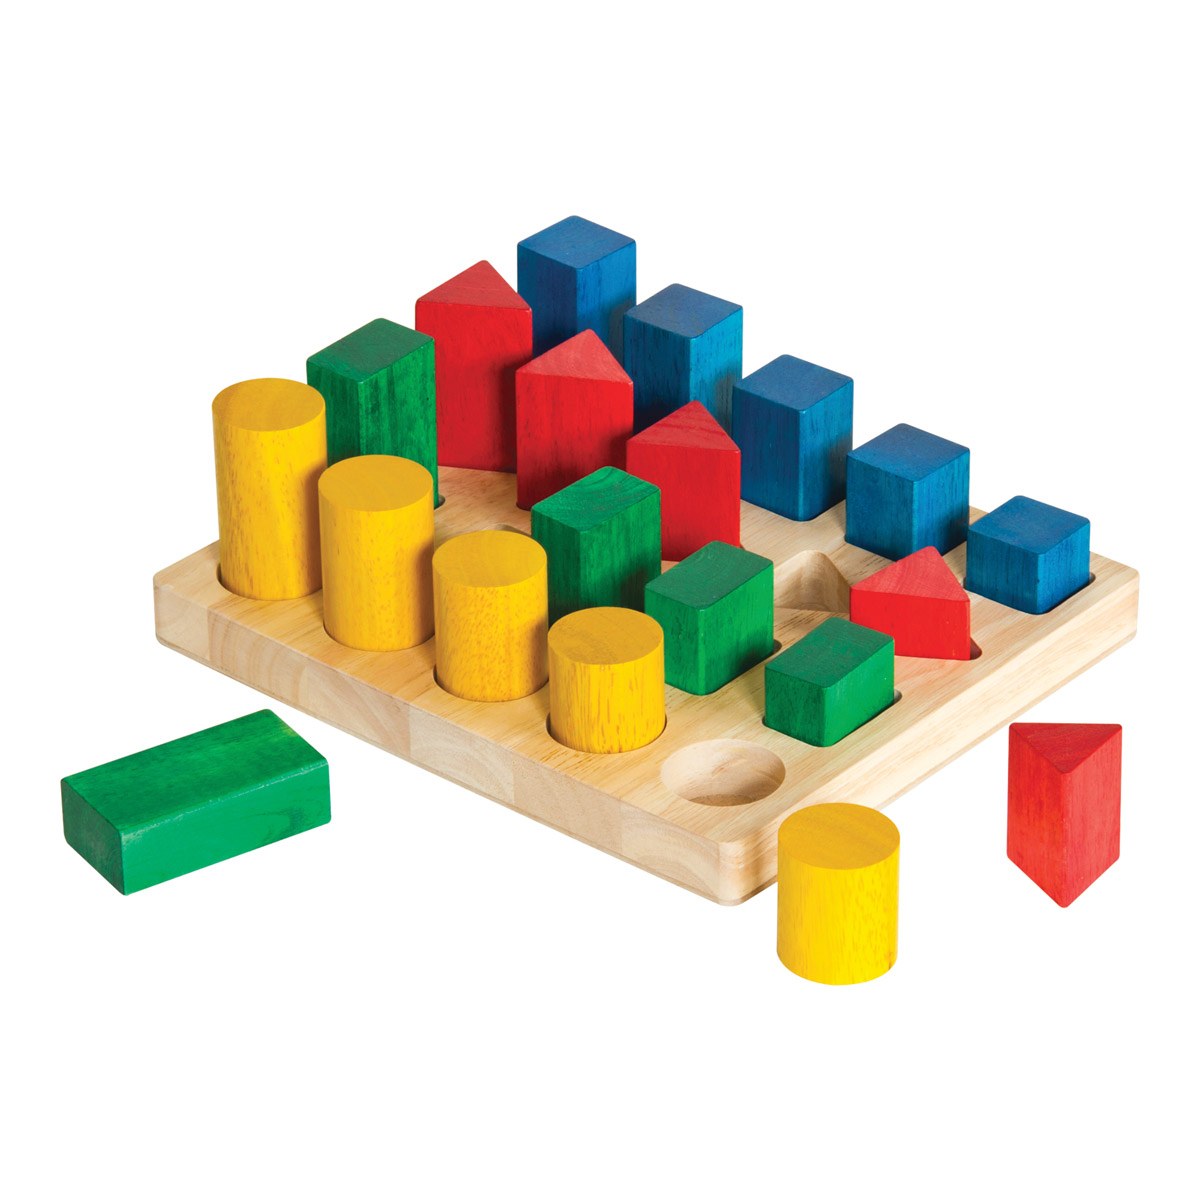 Guidecraft Wooden Colorful Shapes and Sizes Geo Forms